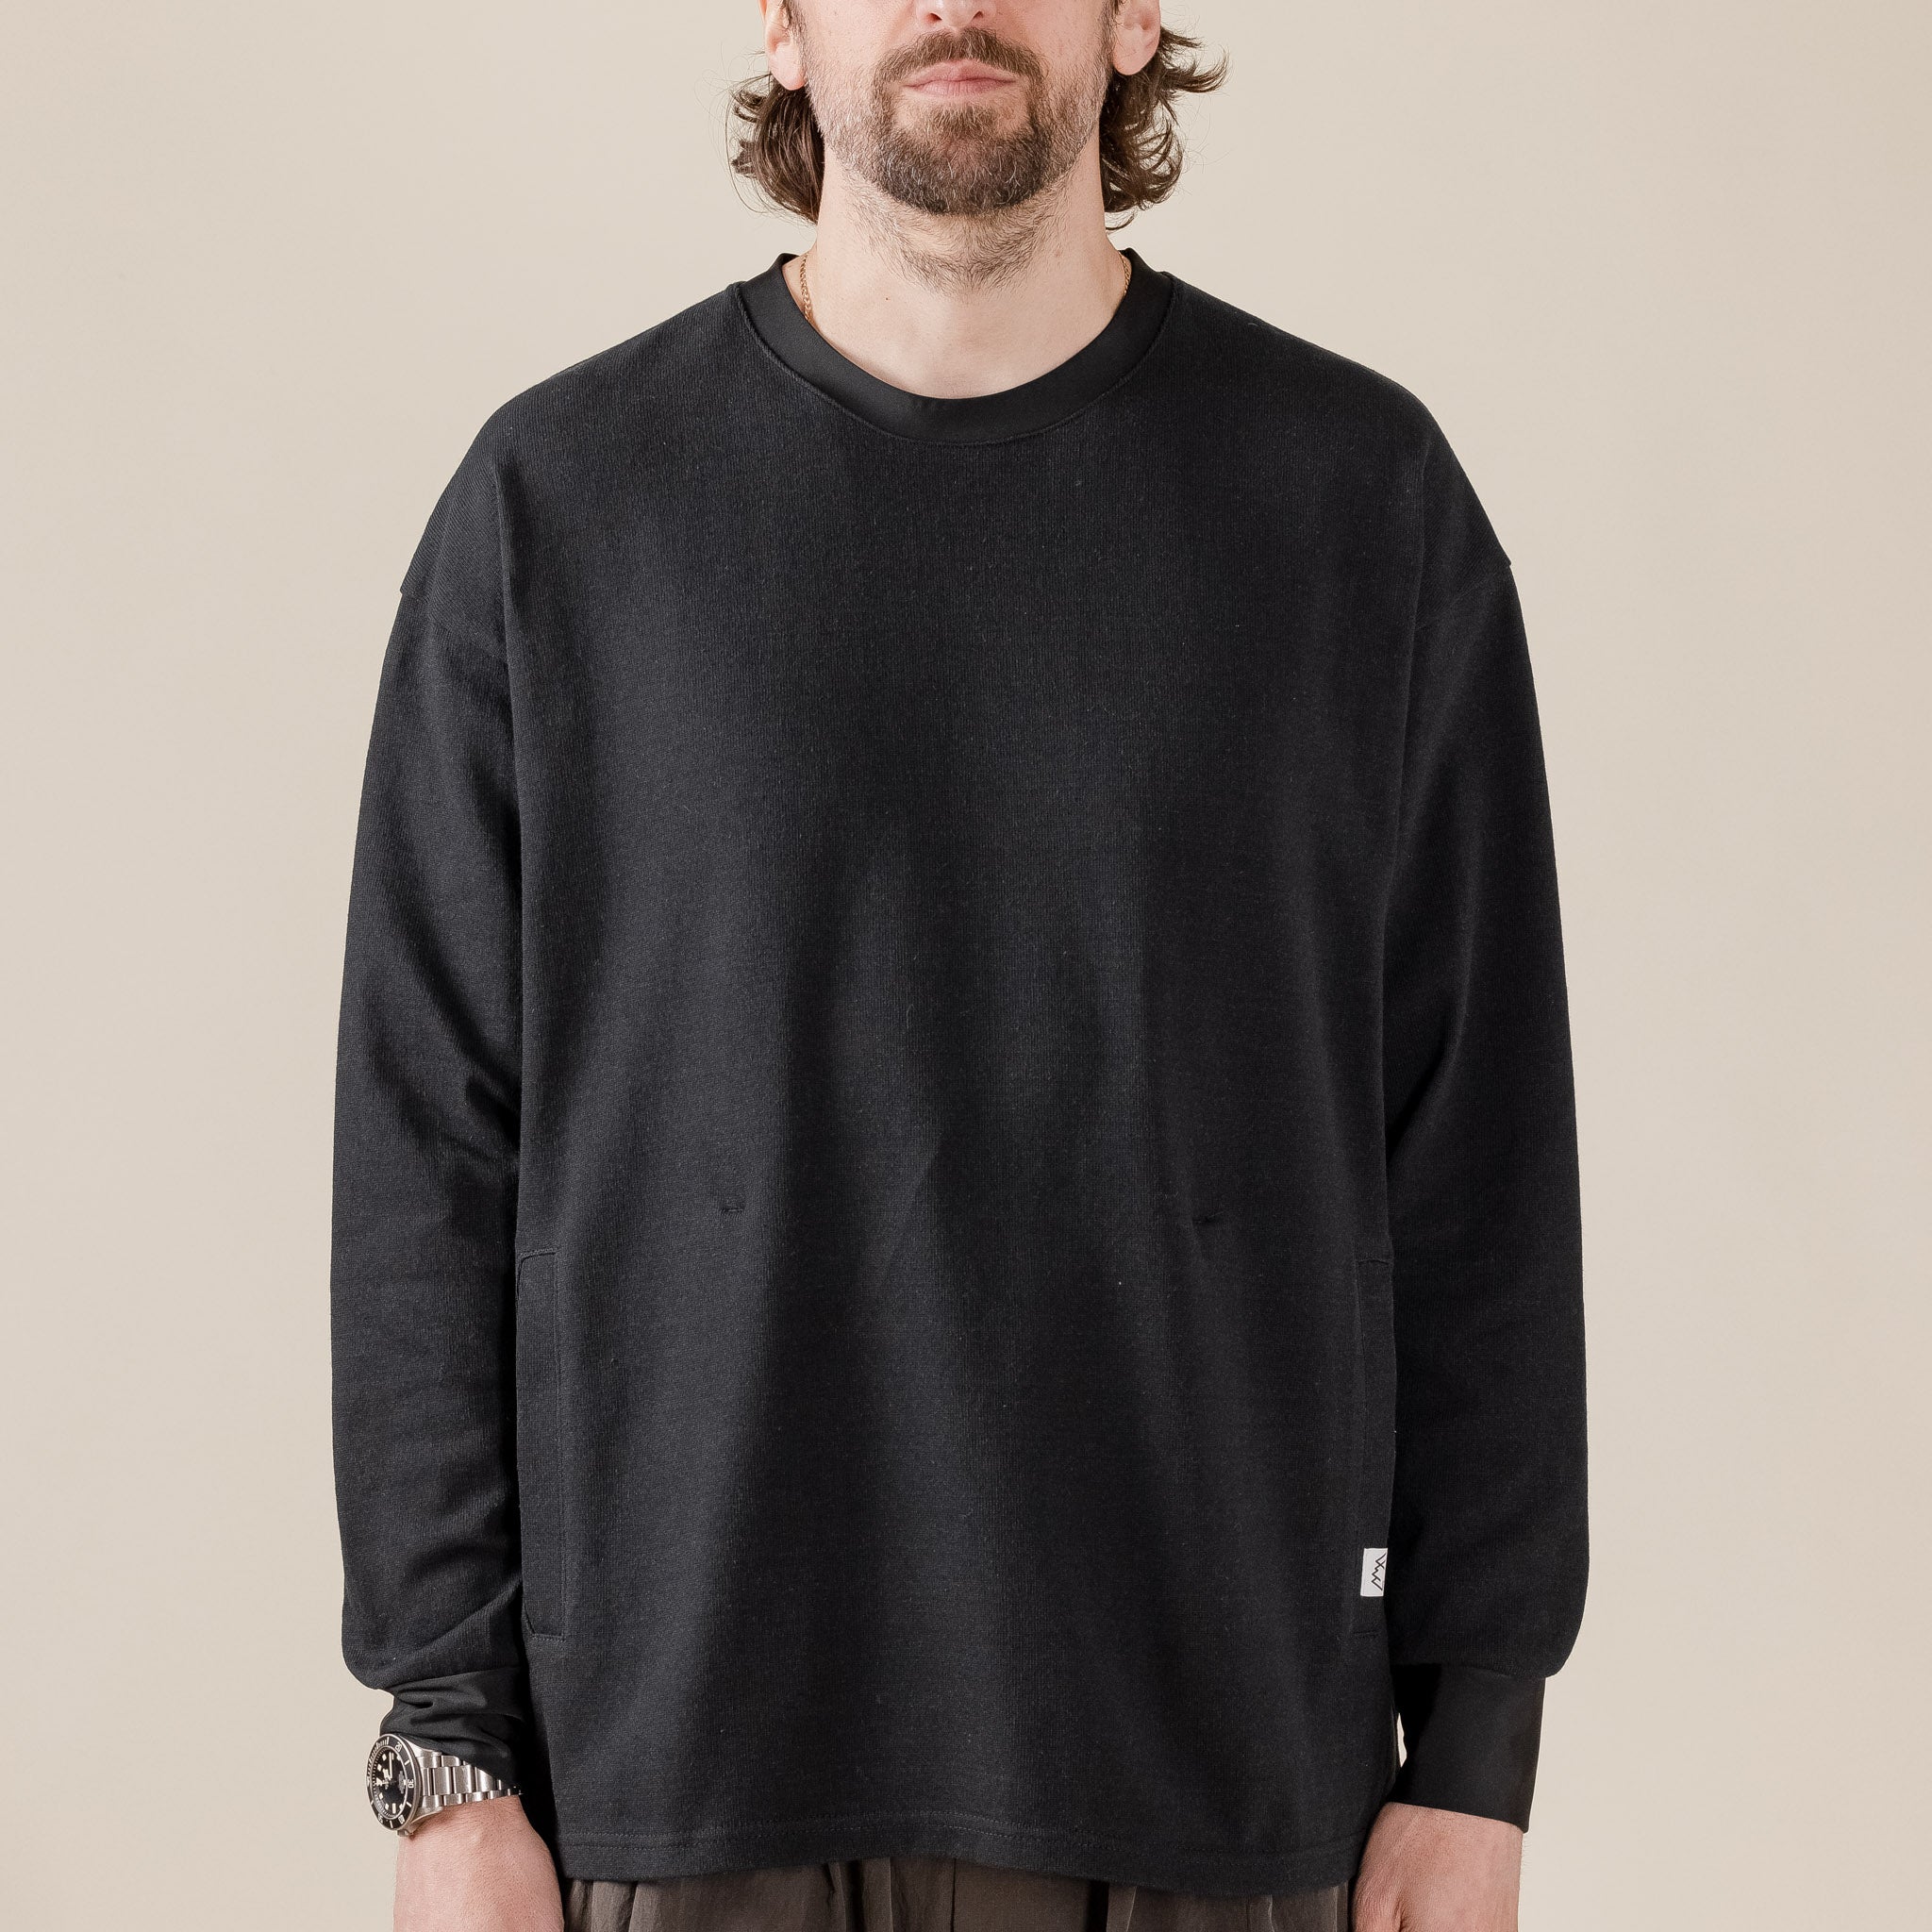 CMF Comfy Outdoor Garment - Heavy Cotton Long Sleeve T-Shirt - Black "lost hills store Japan" "cmf outdoor garment stockists" "comfy outdoor garment stockists" "CMF outdoor garment sale" "comfy outdoor garment sale" "outsiders store"